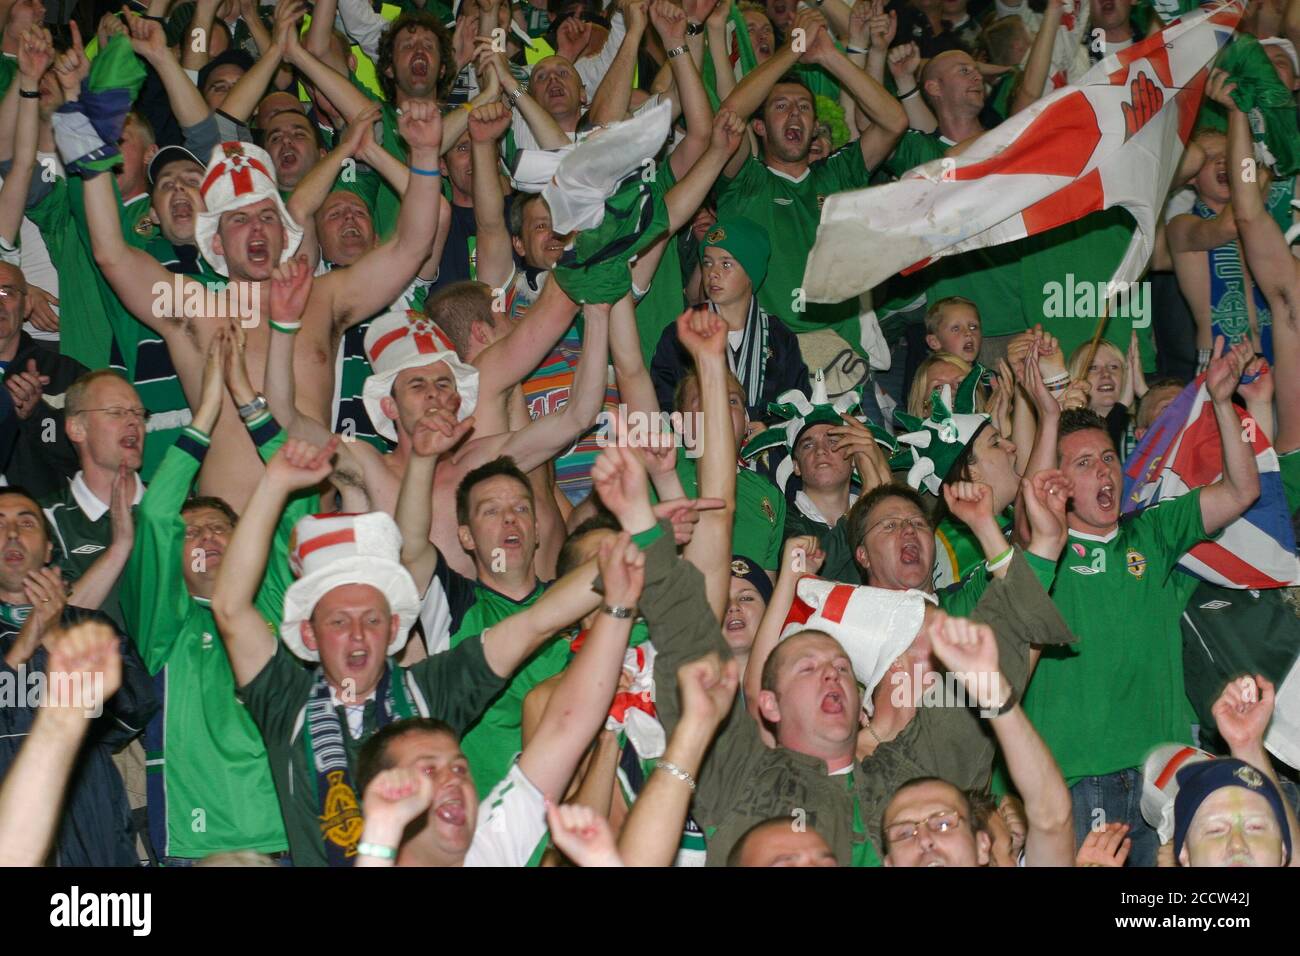 07 September 2005. Windsor Park, Belfast, Northern Ireland. International football – 2006 FIFA World Cup Group 6 Qualifier, Northern Ireland 1 England 0. Northern Ireland fans celebrate a famous victory at the end of the match against England. Stock Photo